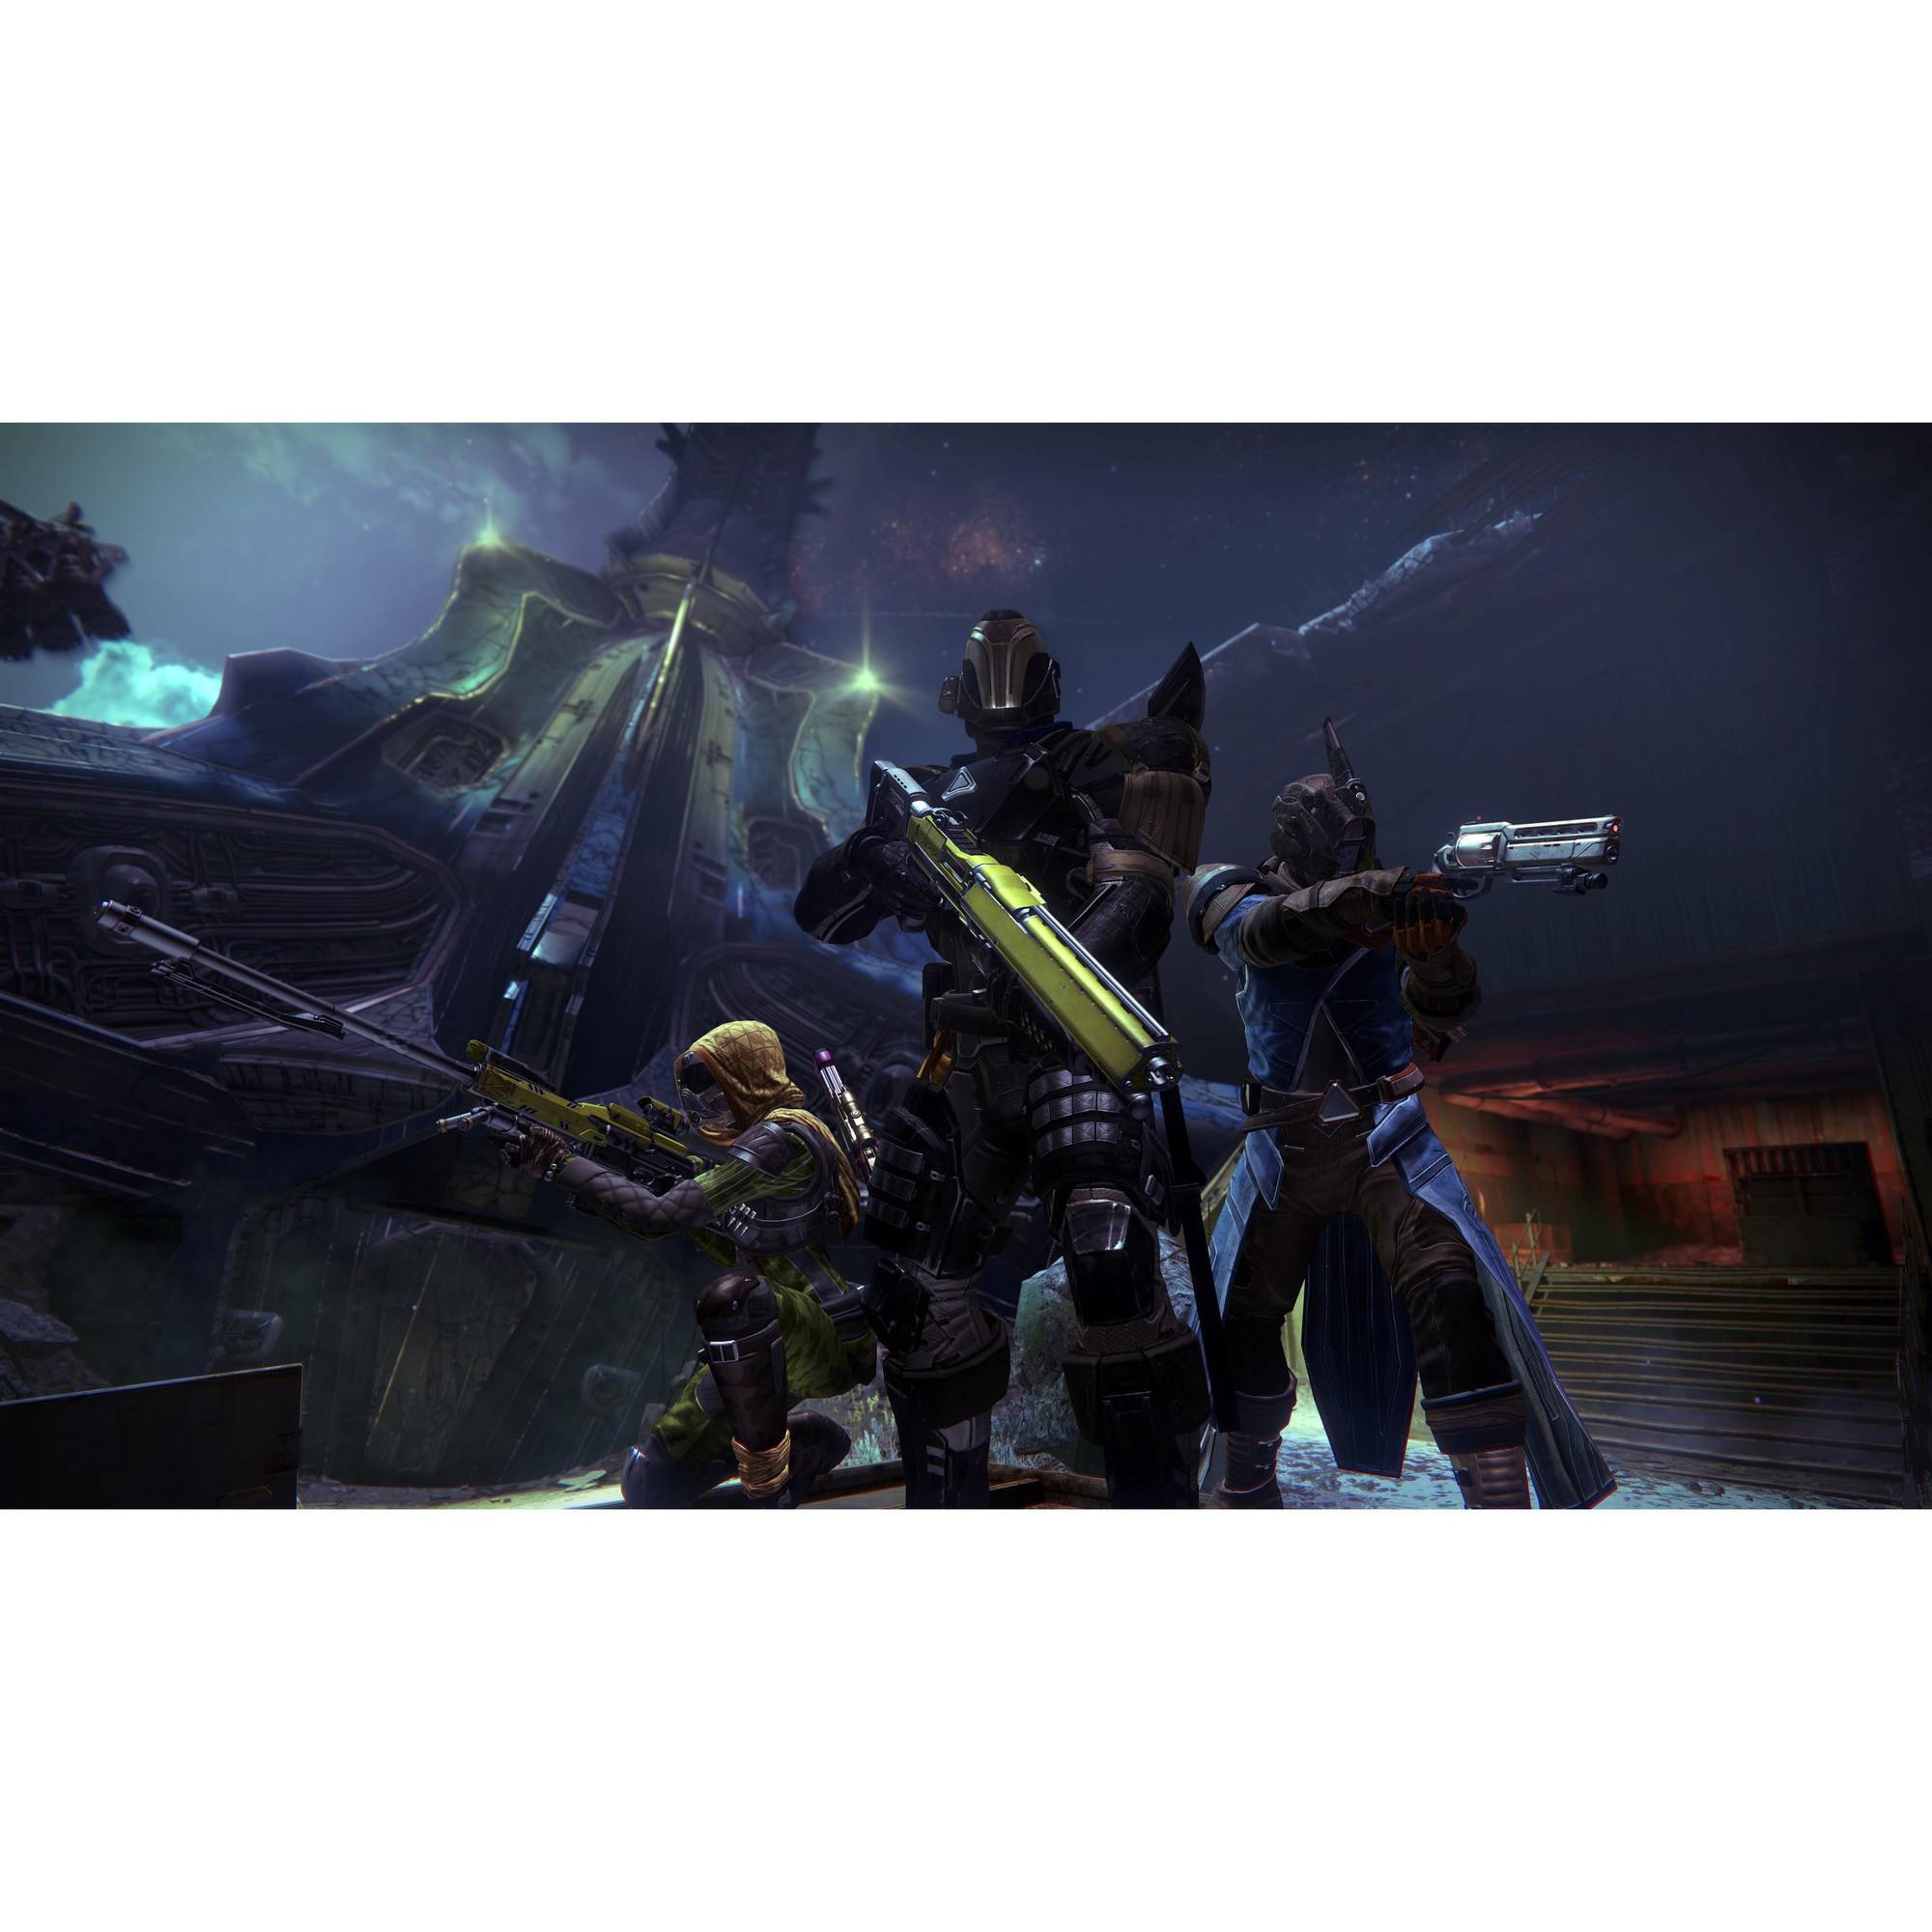 Destiny: The Taken King Legendary Edition, Activision, PlayStation 4, 047875874428 - image 3 of 31